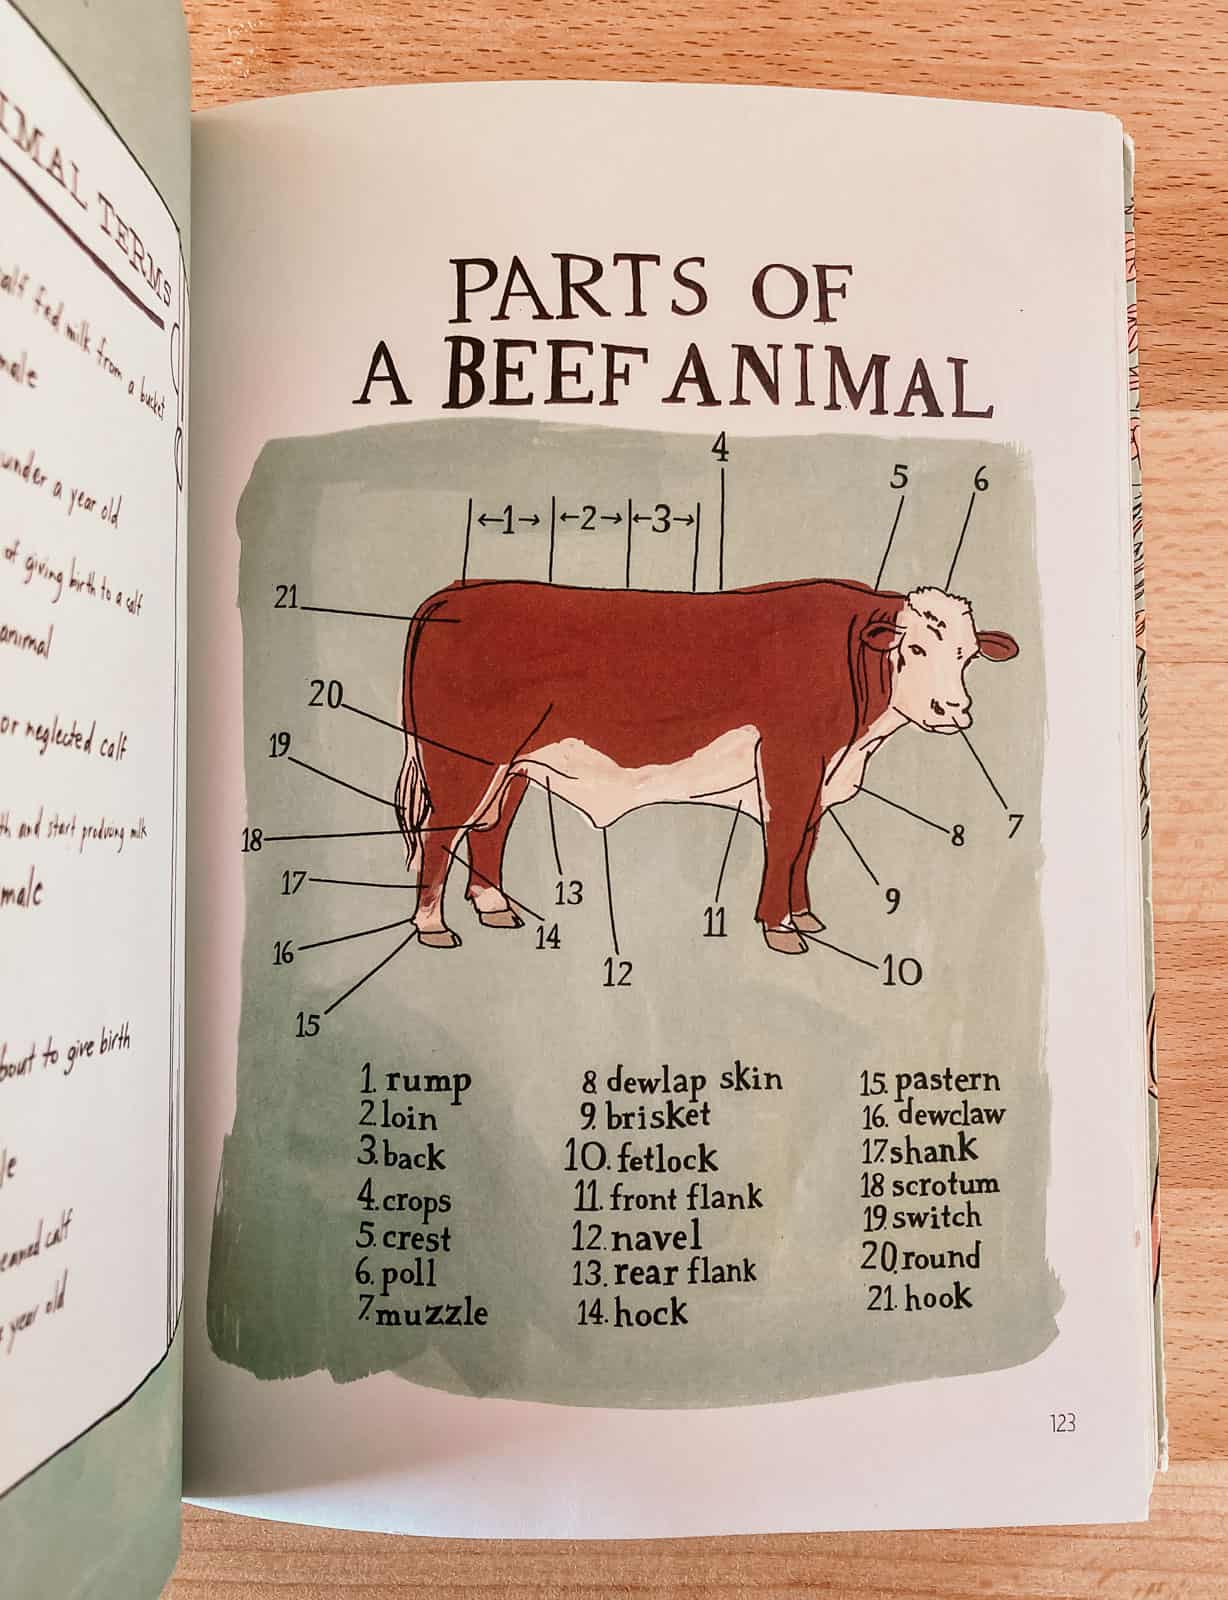 Parts of a beef animal diagram from Farm Anatomy by Julia Rothman